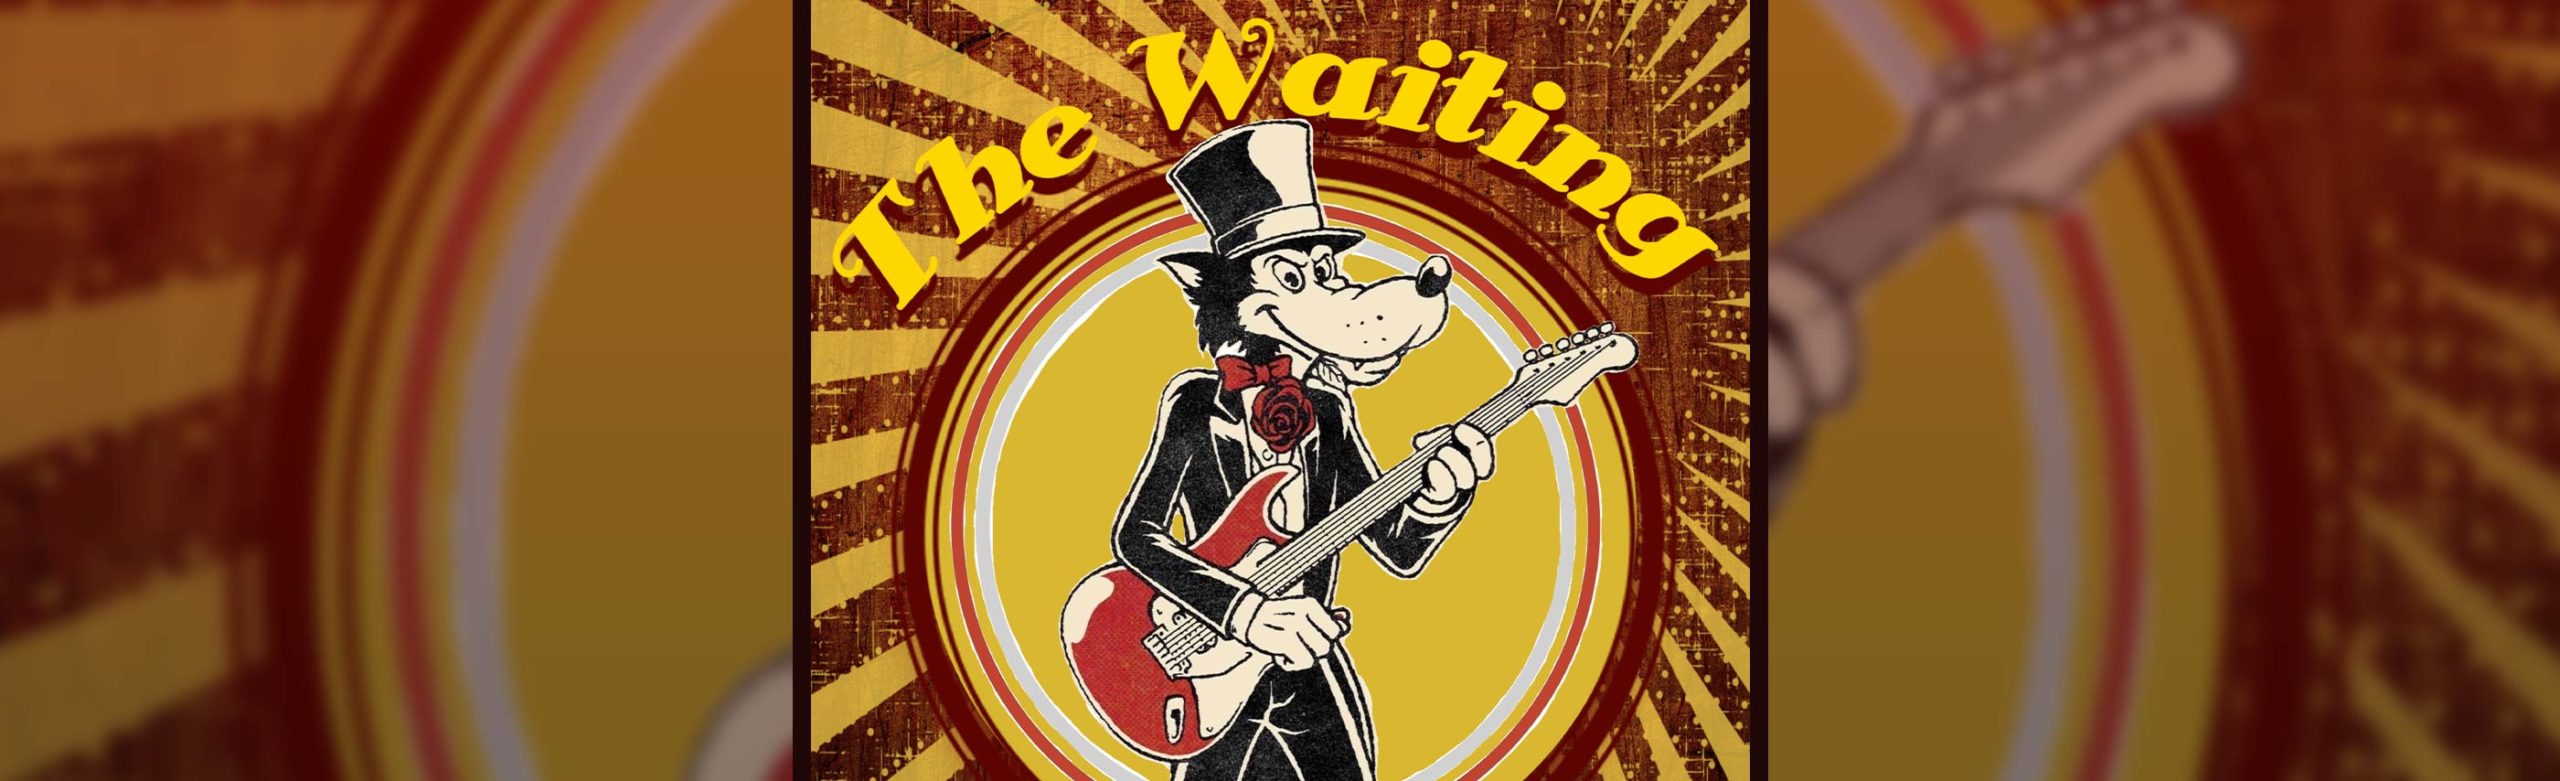 Local Tribute Band The Waiting to Celebrate Tom Petty & The Heartbreakers at The ELM Image